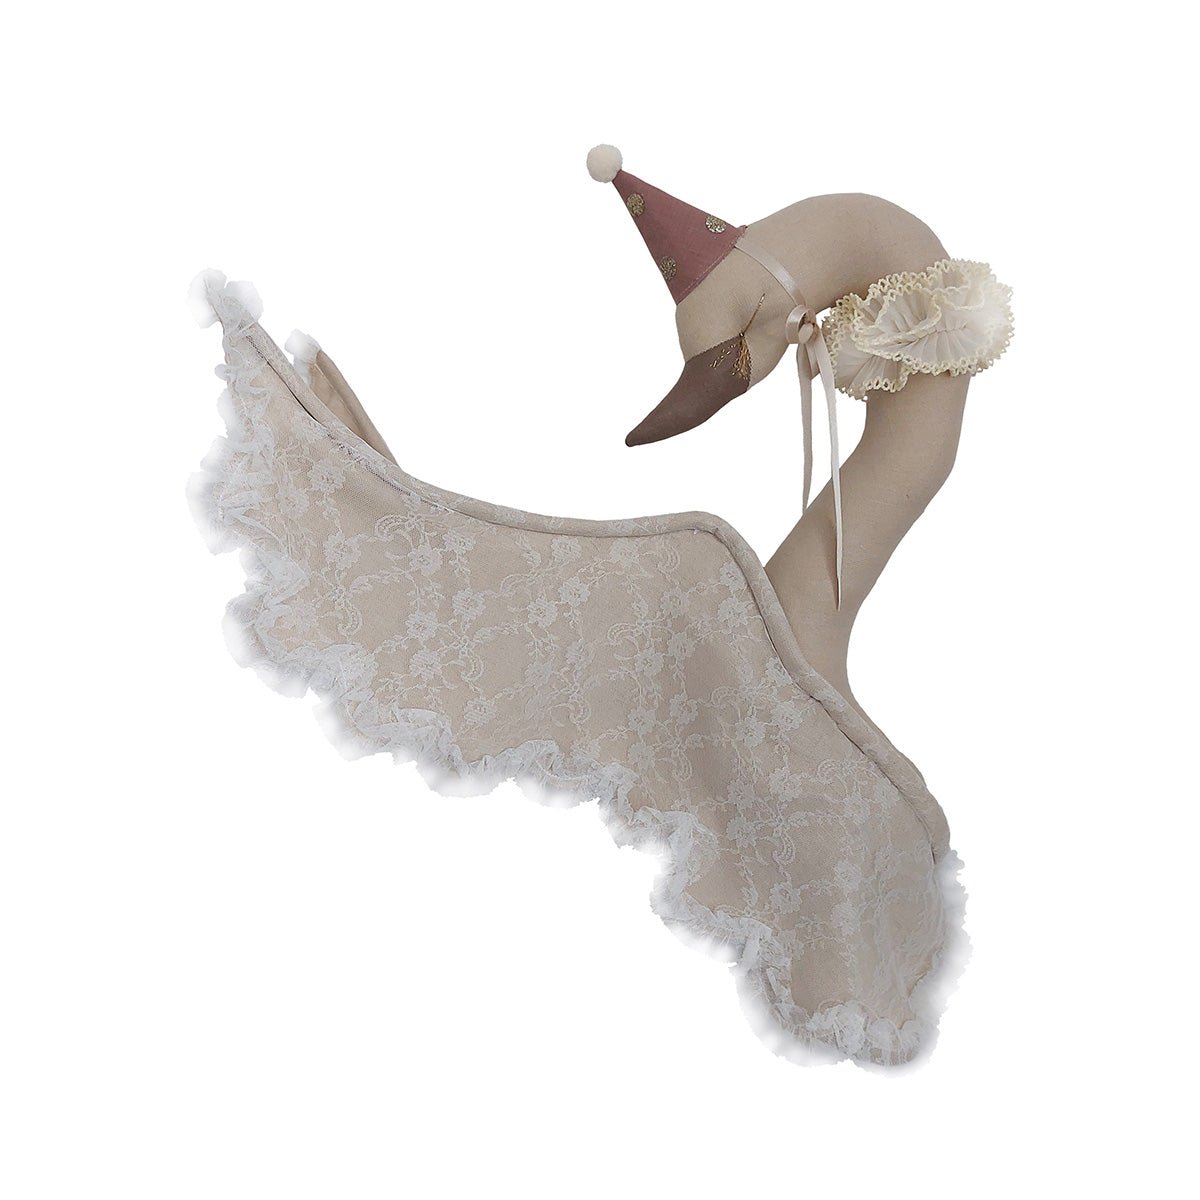 Swan with Lace in Cap by Love Me - Maude Kids Decor